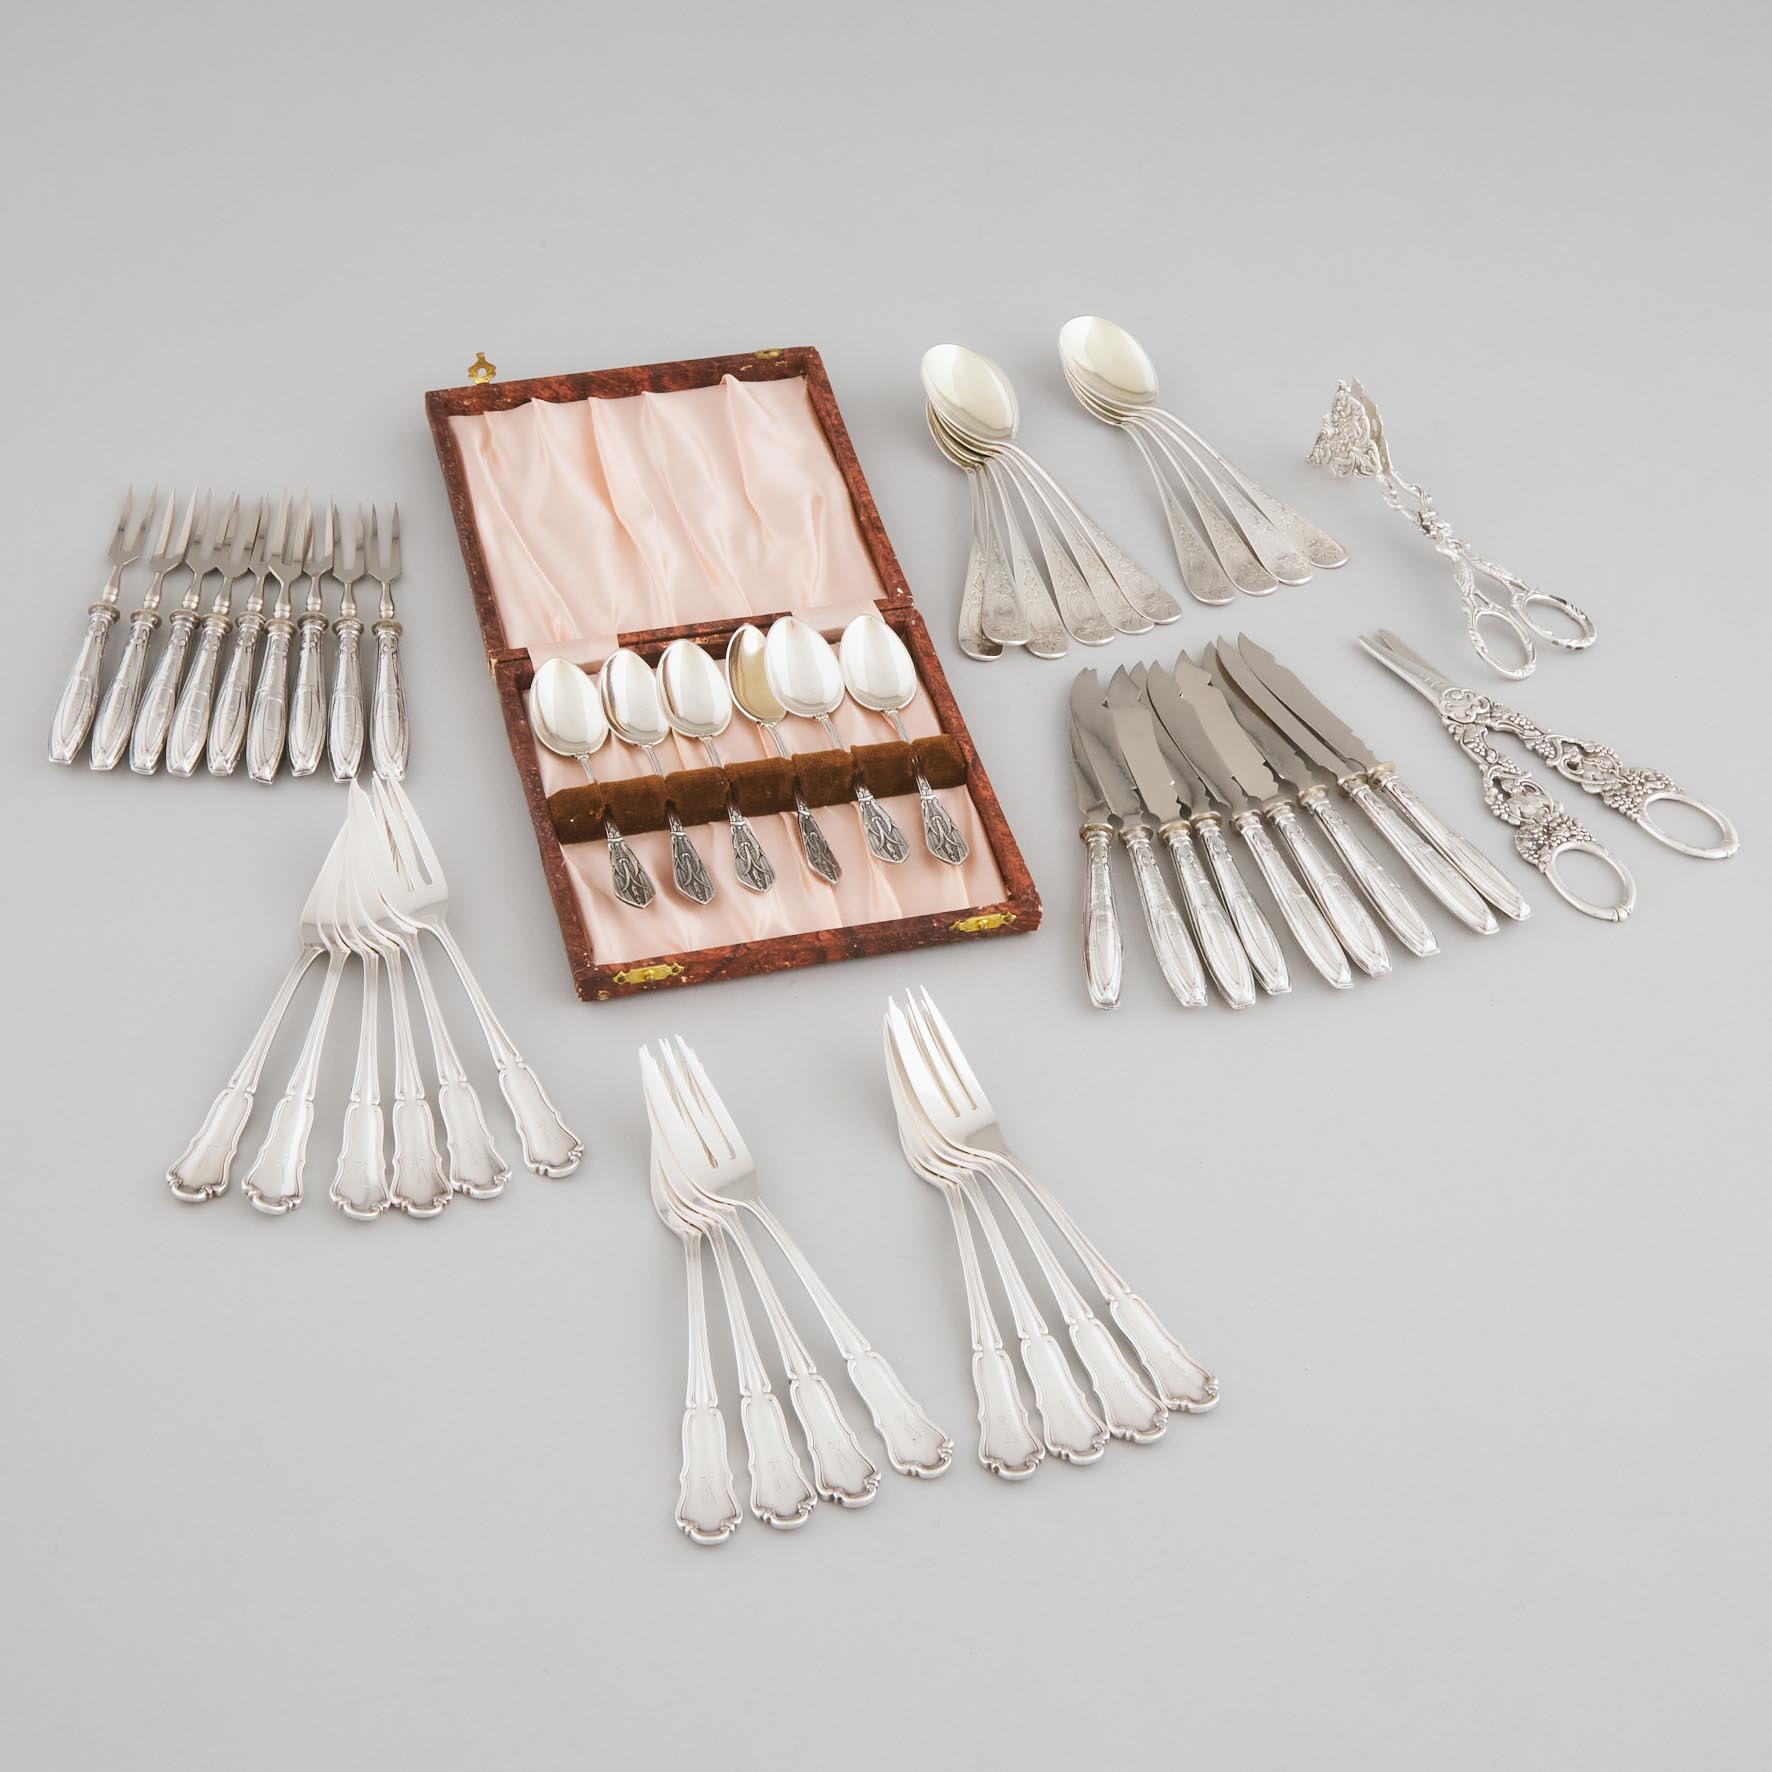 Group of German Silver Flatware, late 19th/20th century